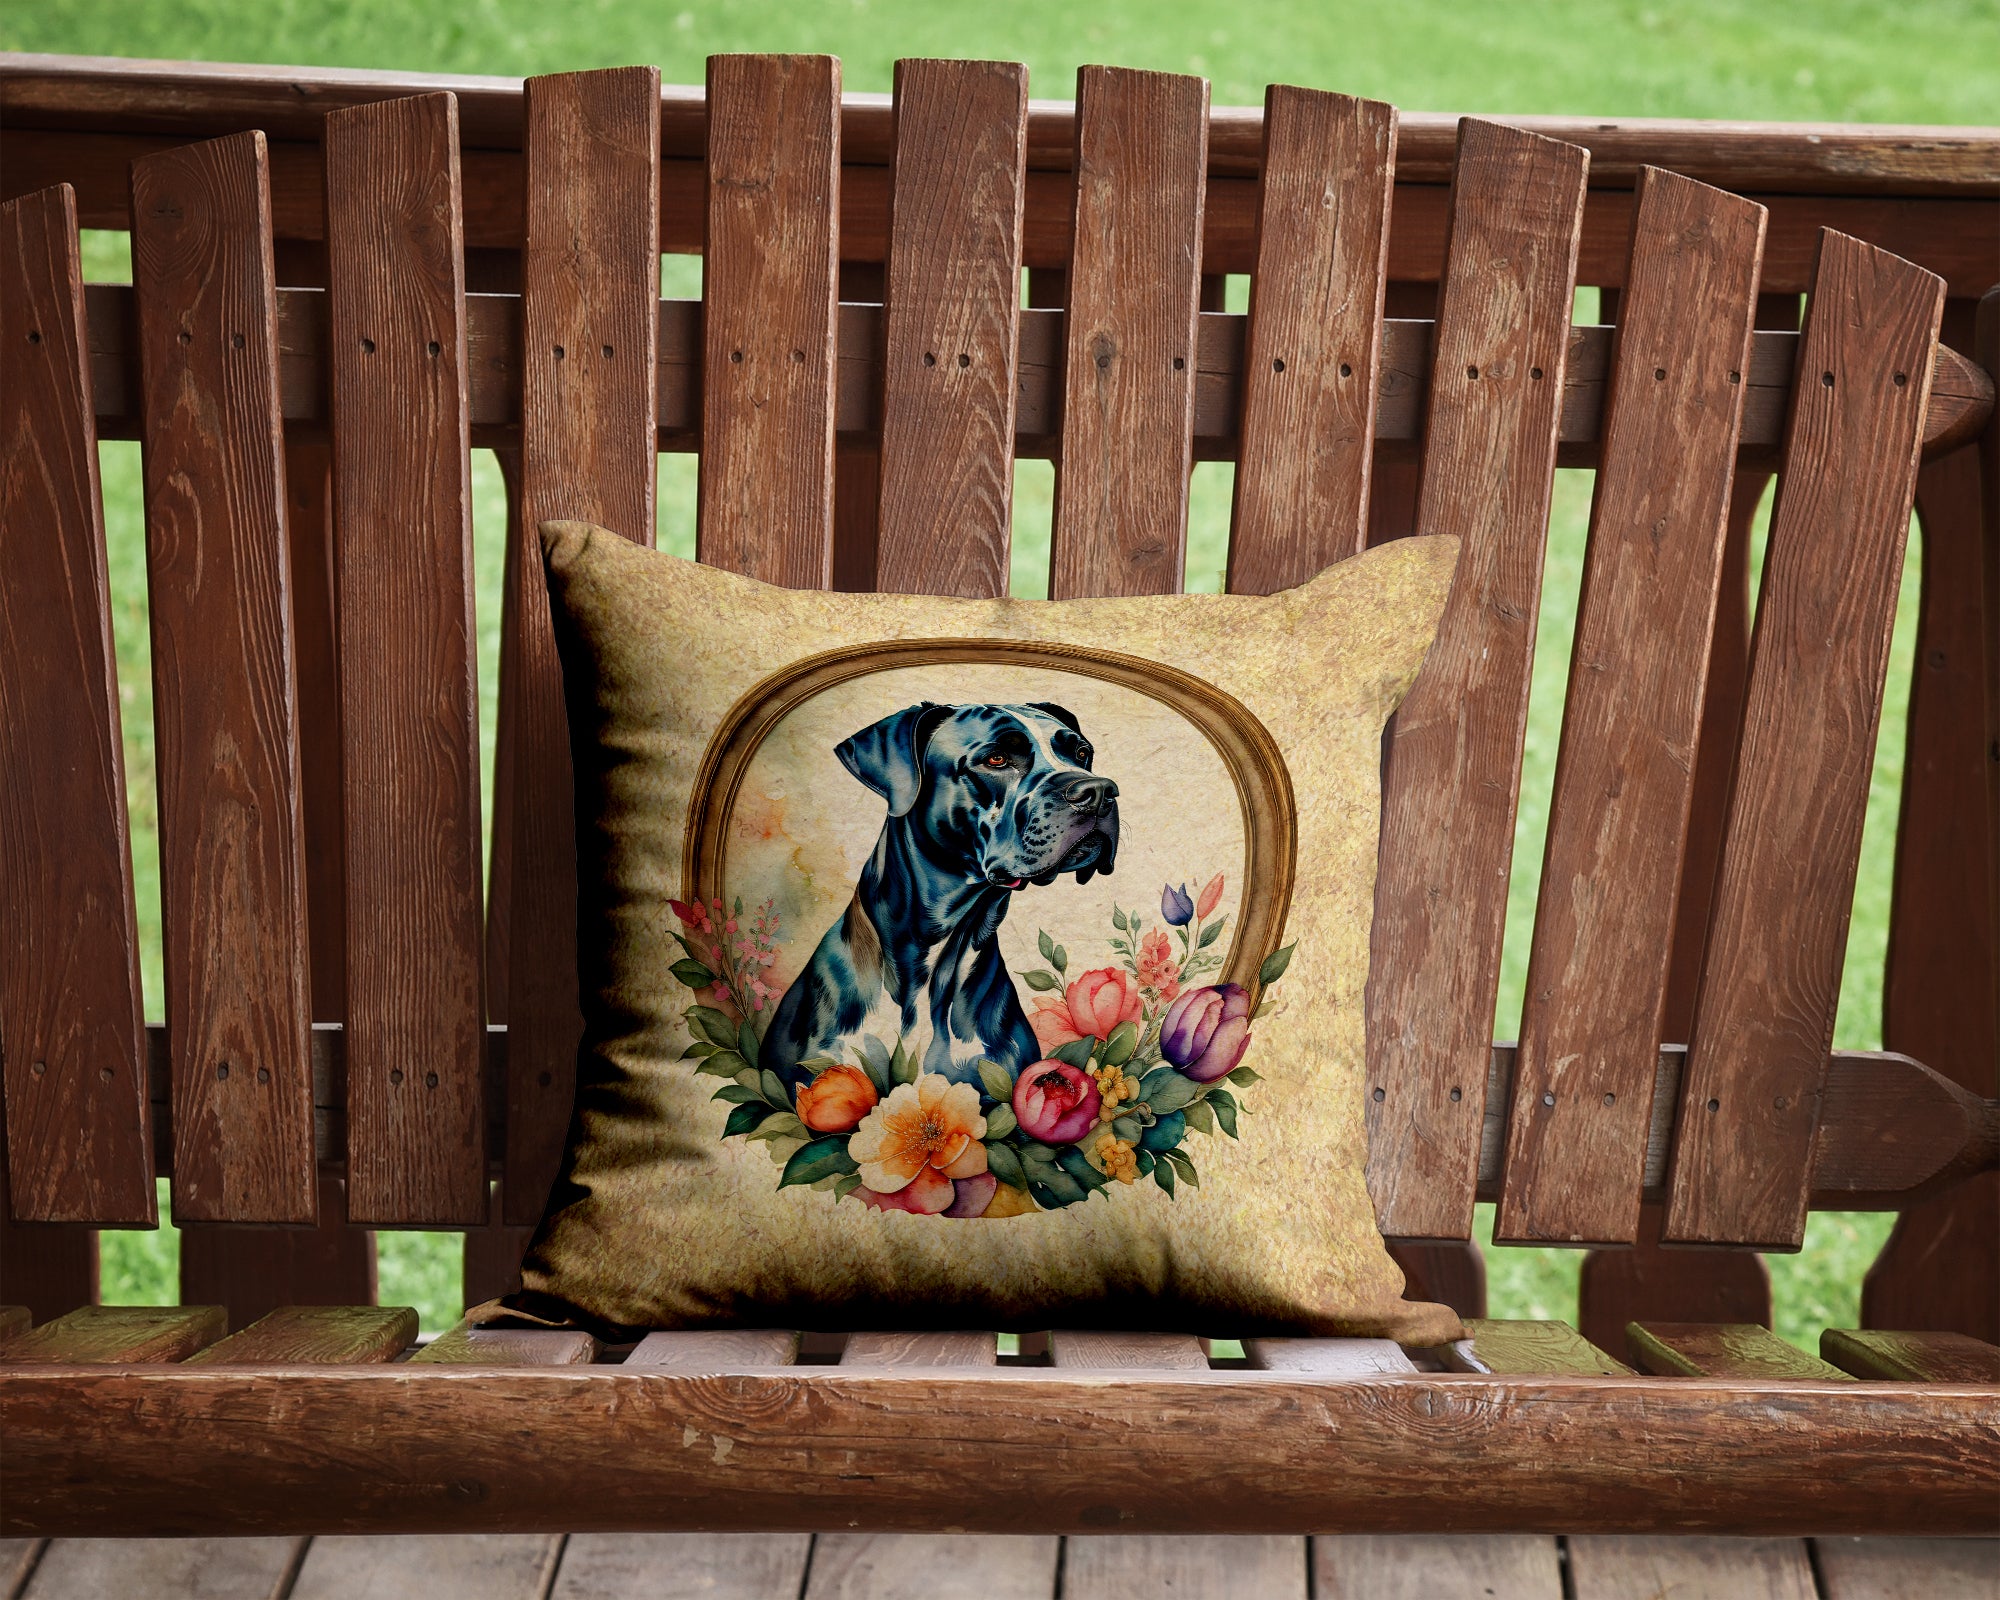 Buy this Great Dane and Flowers Fabric Decorative Pillow